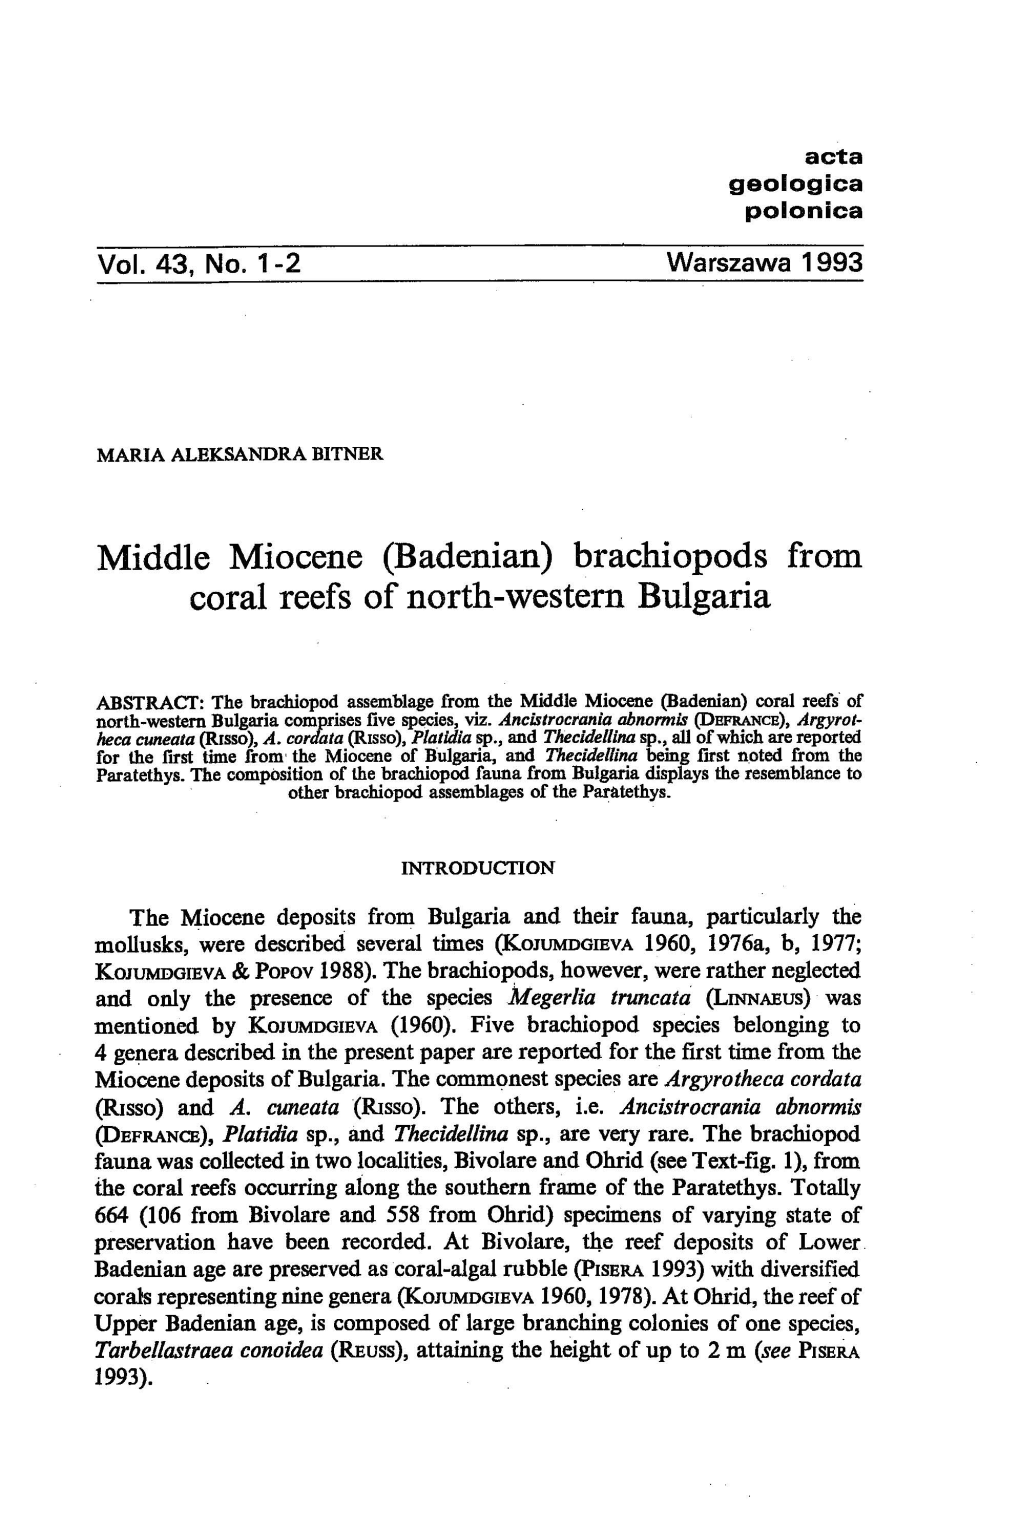 Middle Miocene (Badenian) Brachiopods from Coral Reefs of North-Western Bulgaria